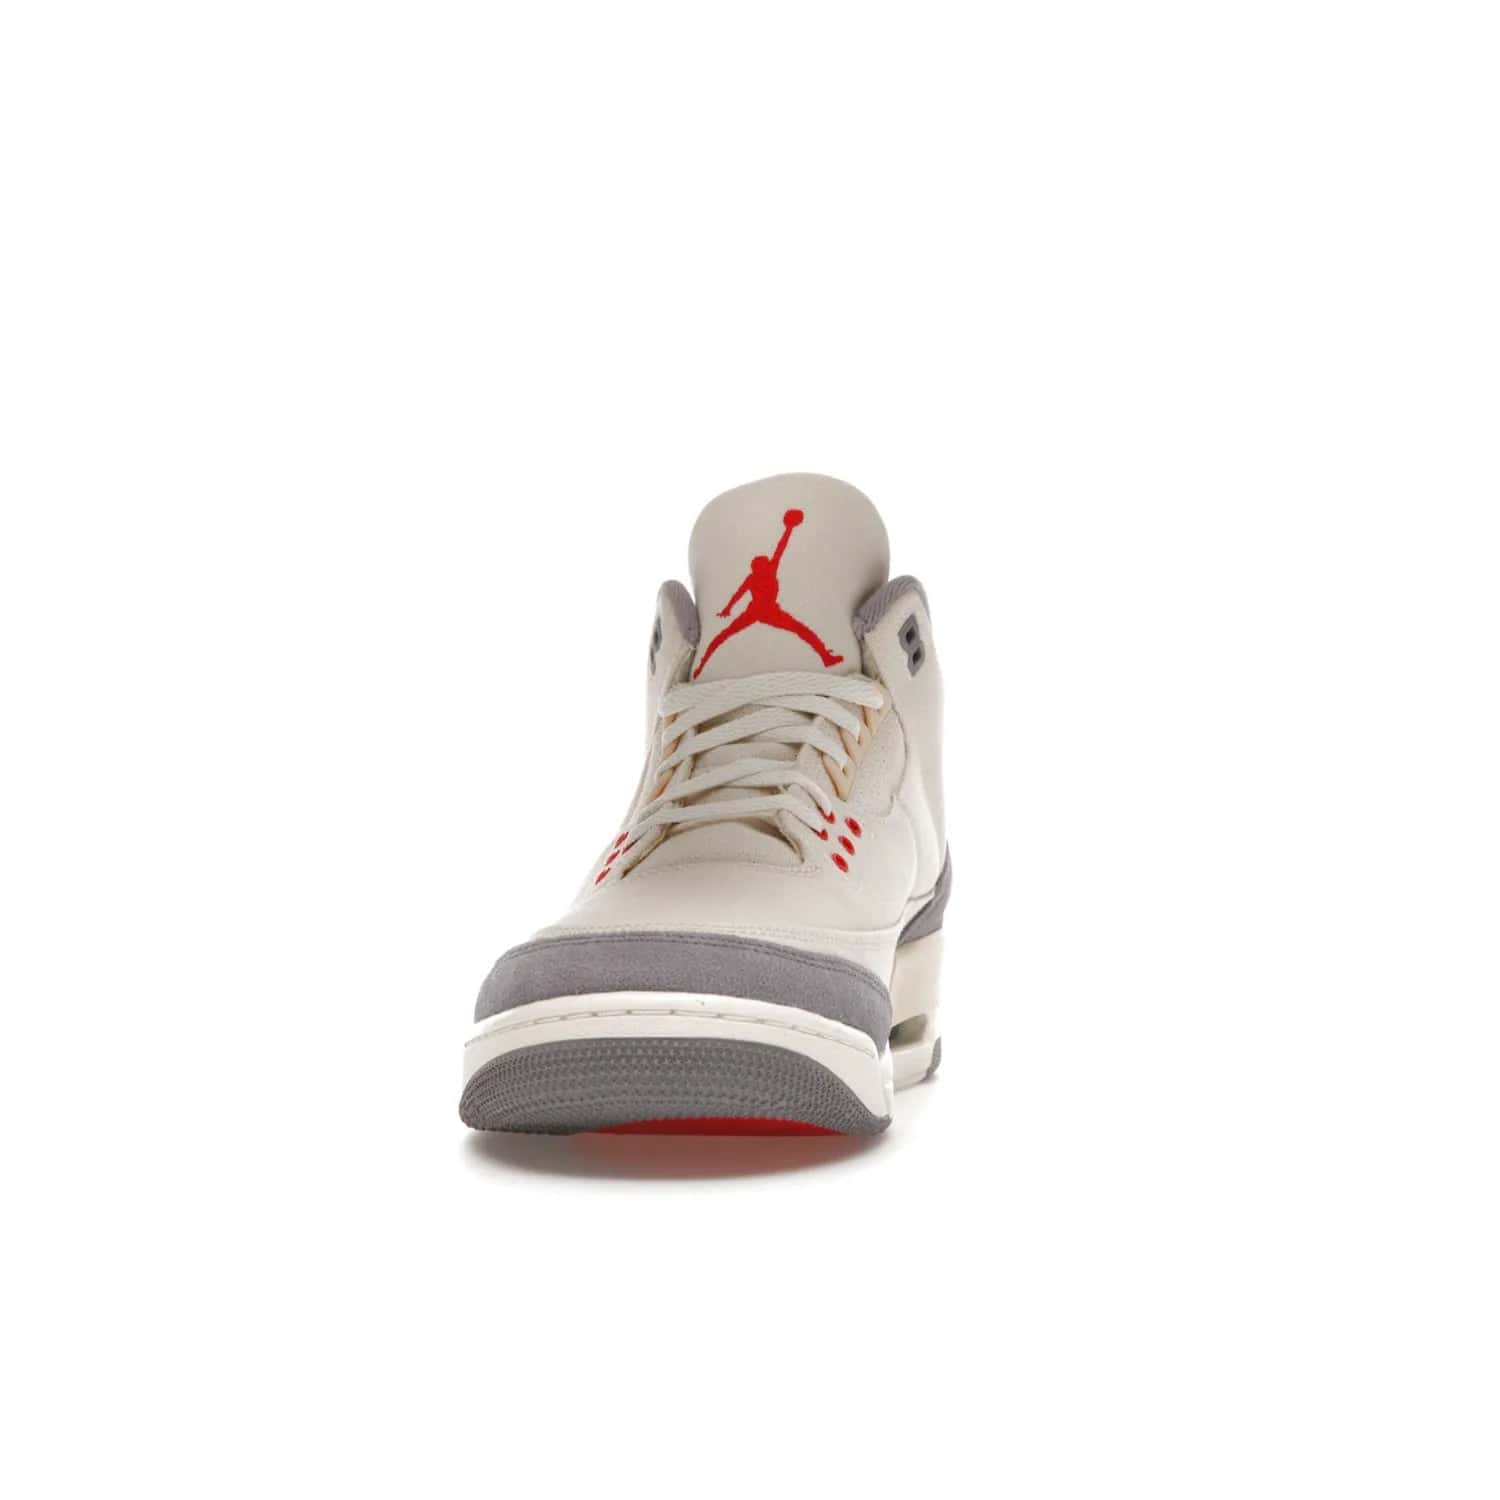 Jordan 3 Retro Muslin - Image 11 - Only at www.BallersClubKickz.com - Eye-catching Air Jordan 3 Retro Muslin in a neutral palette of grey, cream, and red. Featuring canvas upper, suede overlays and white/grey Air Max sole. Available in March 2022.